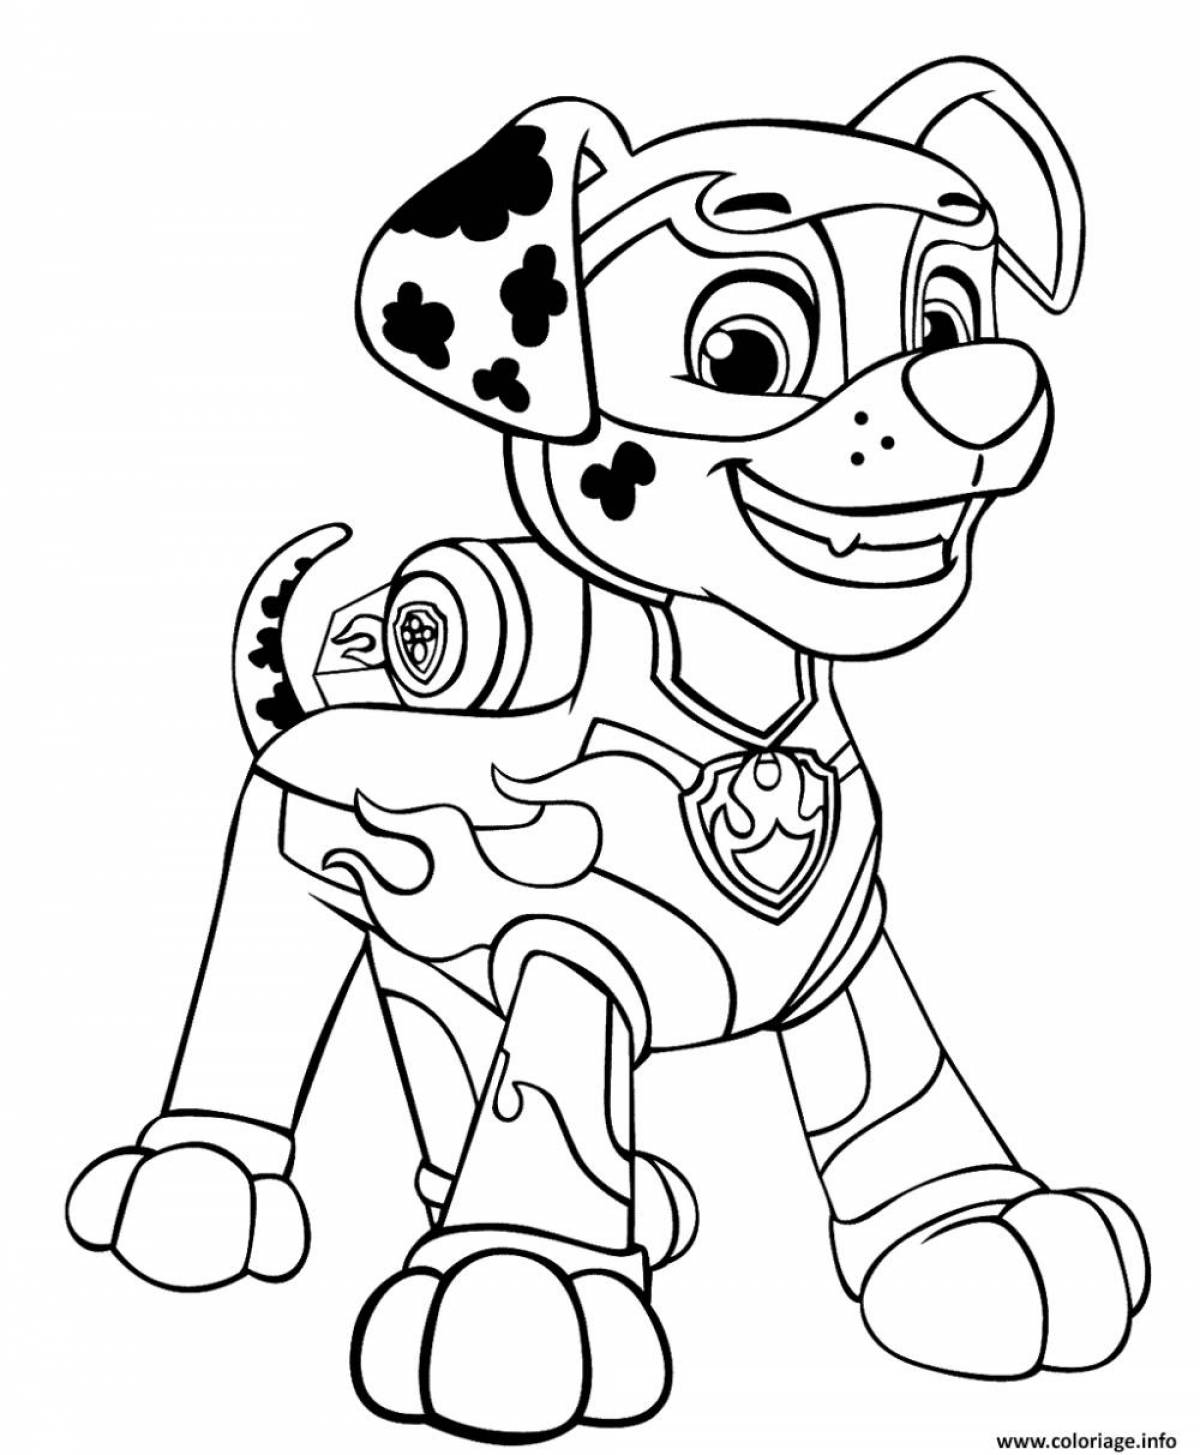 Incredible Paw Patrol coloring book for girls